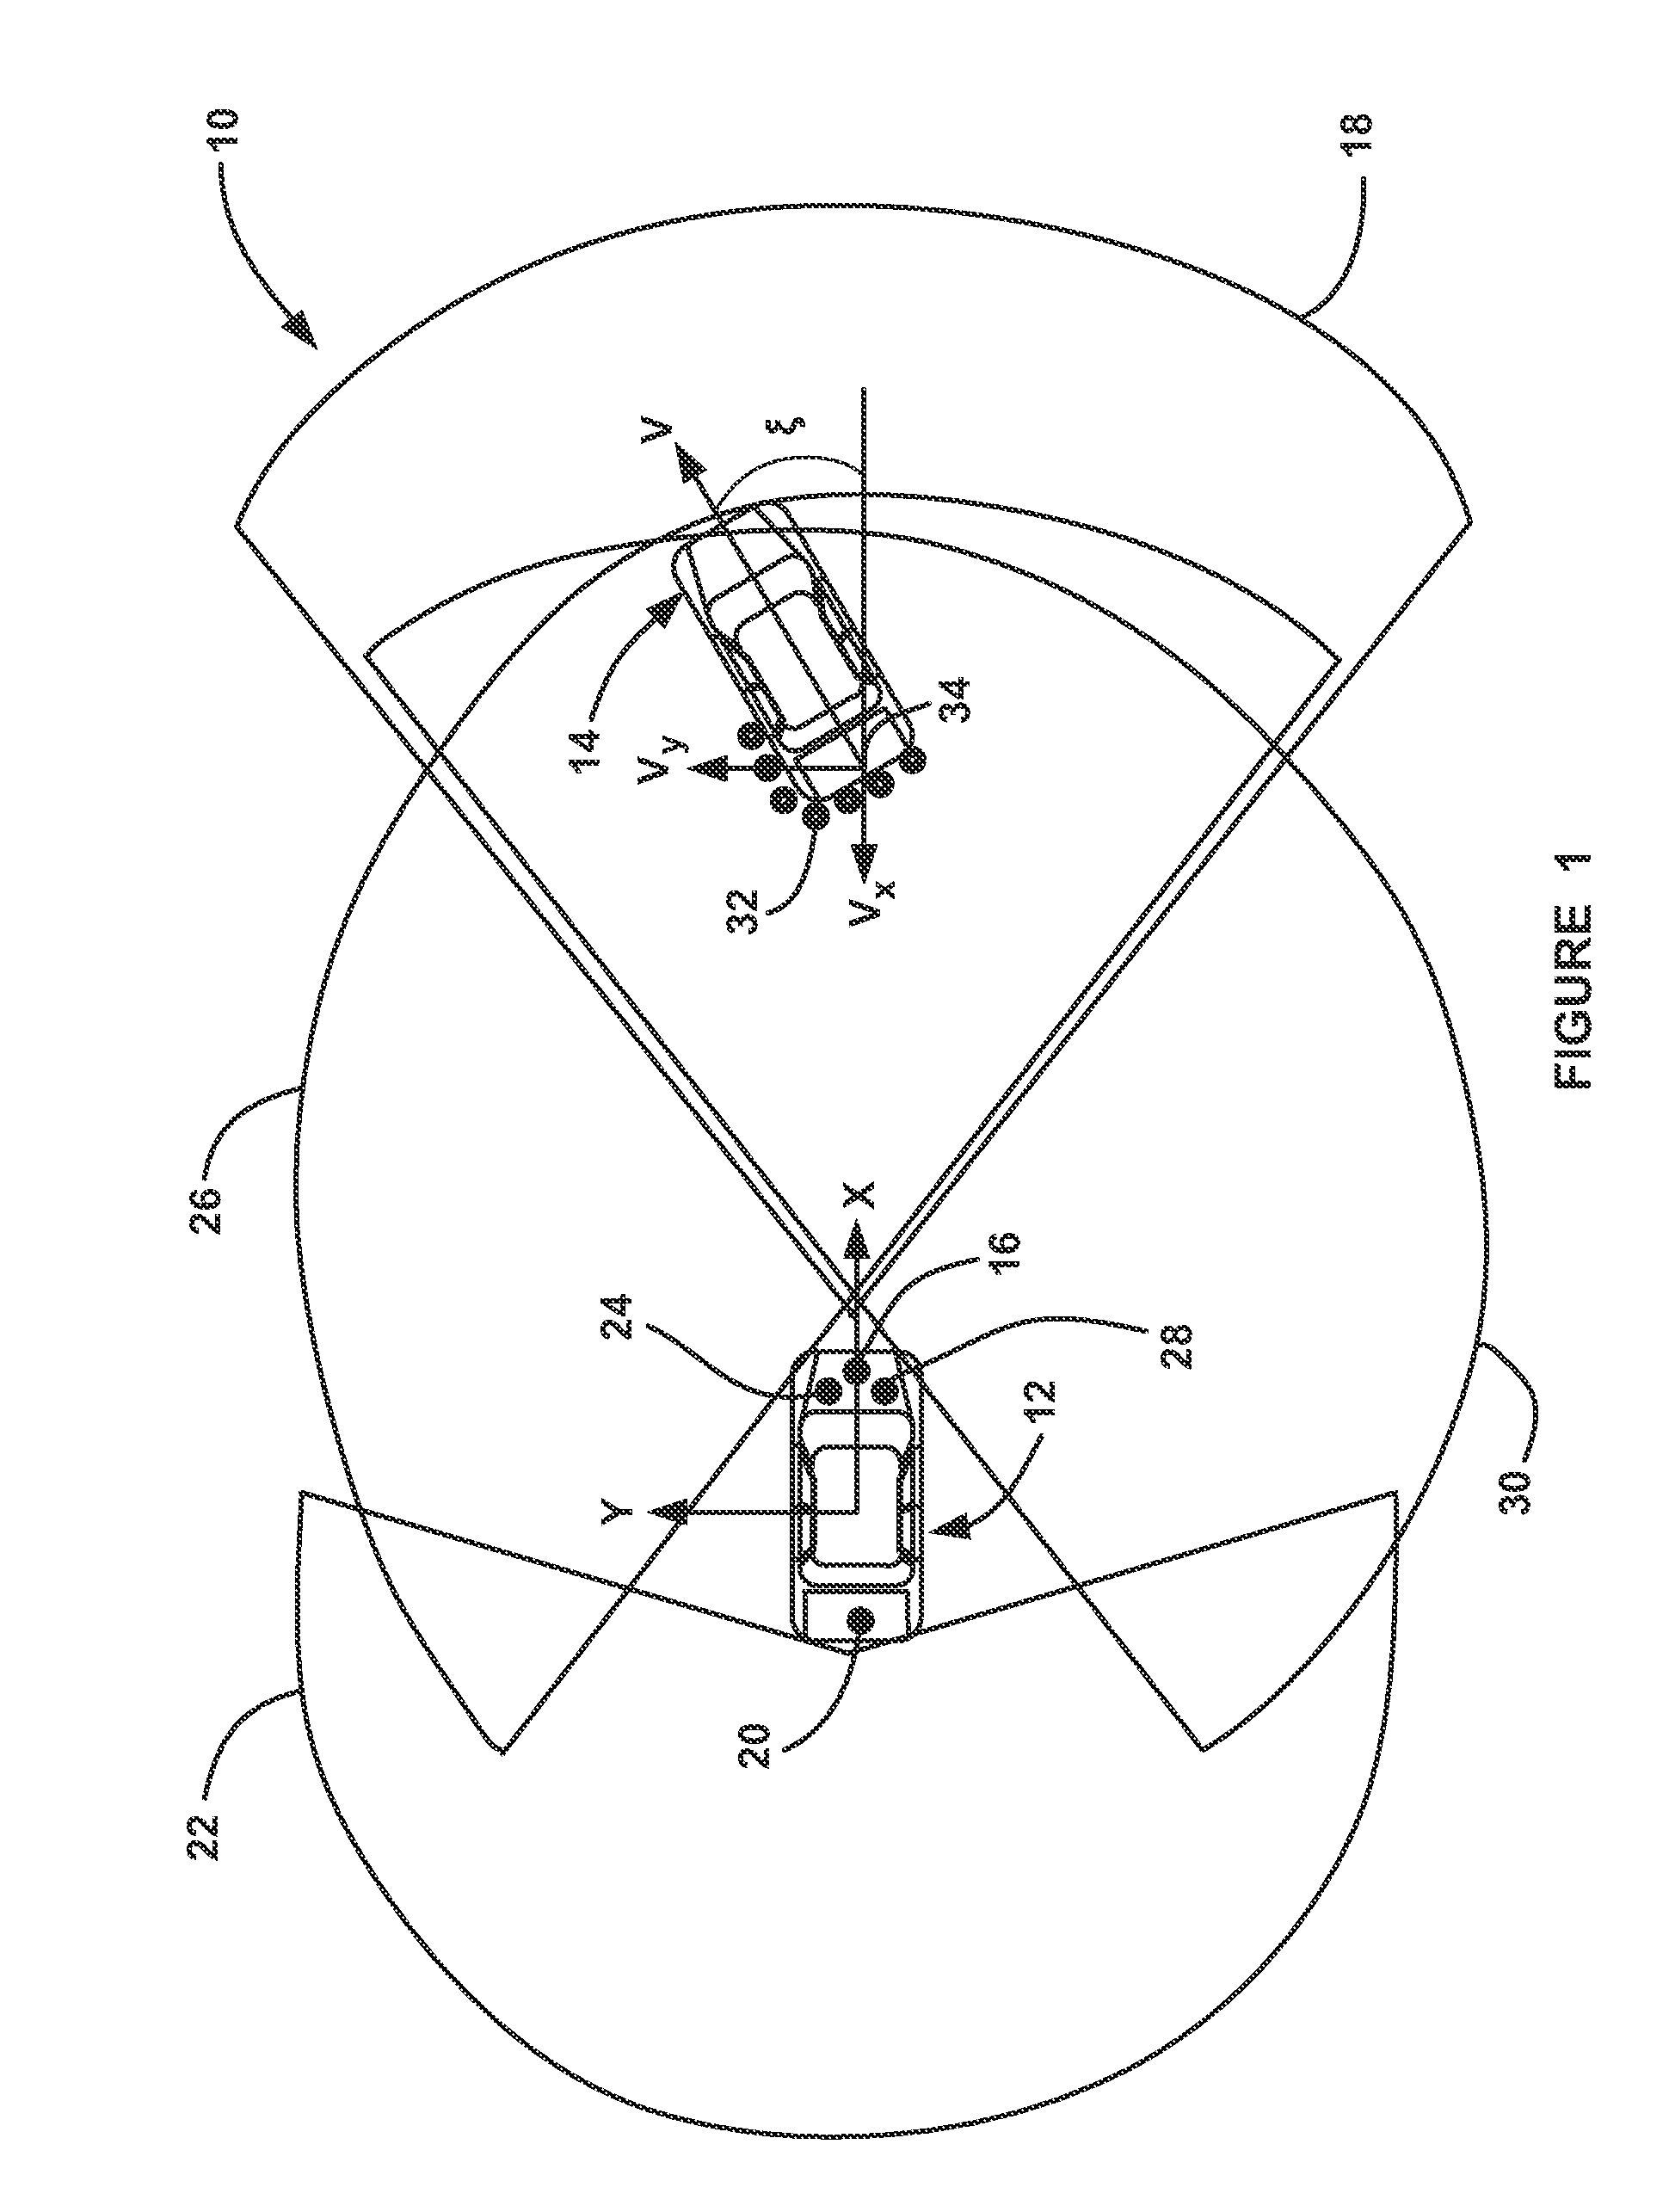 METHODS AND APPARATUS OF FUSING RADAR/CAMERA OBJECT DATA AND LiDAR SCAN POINTS